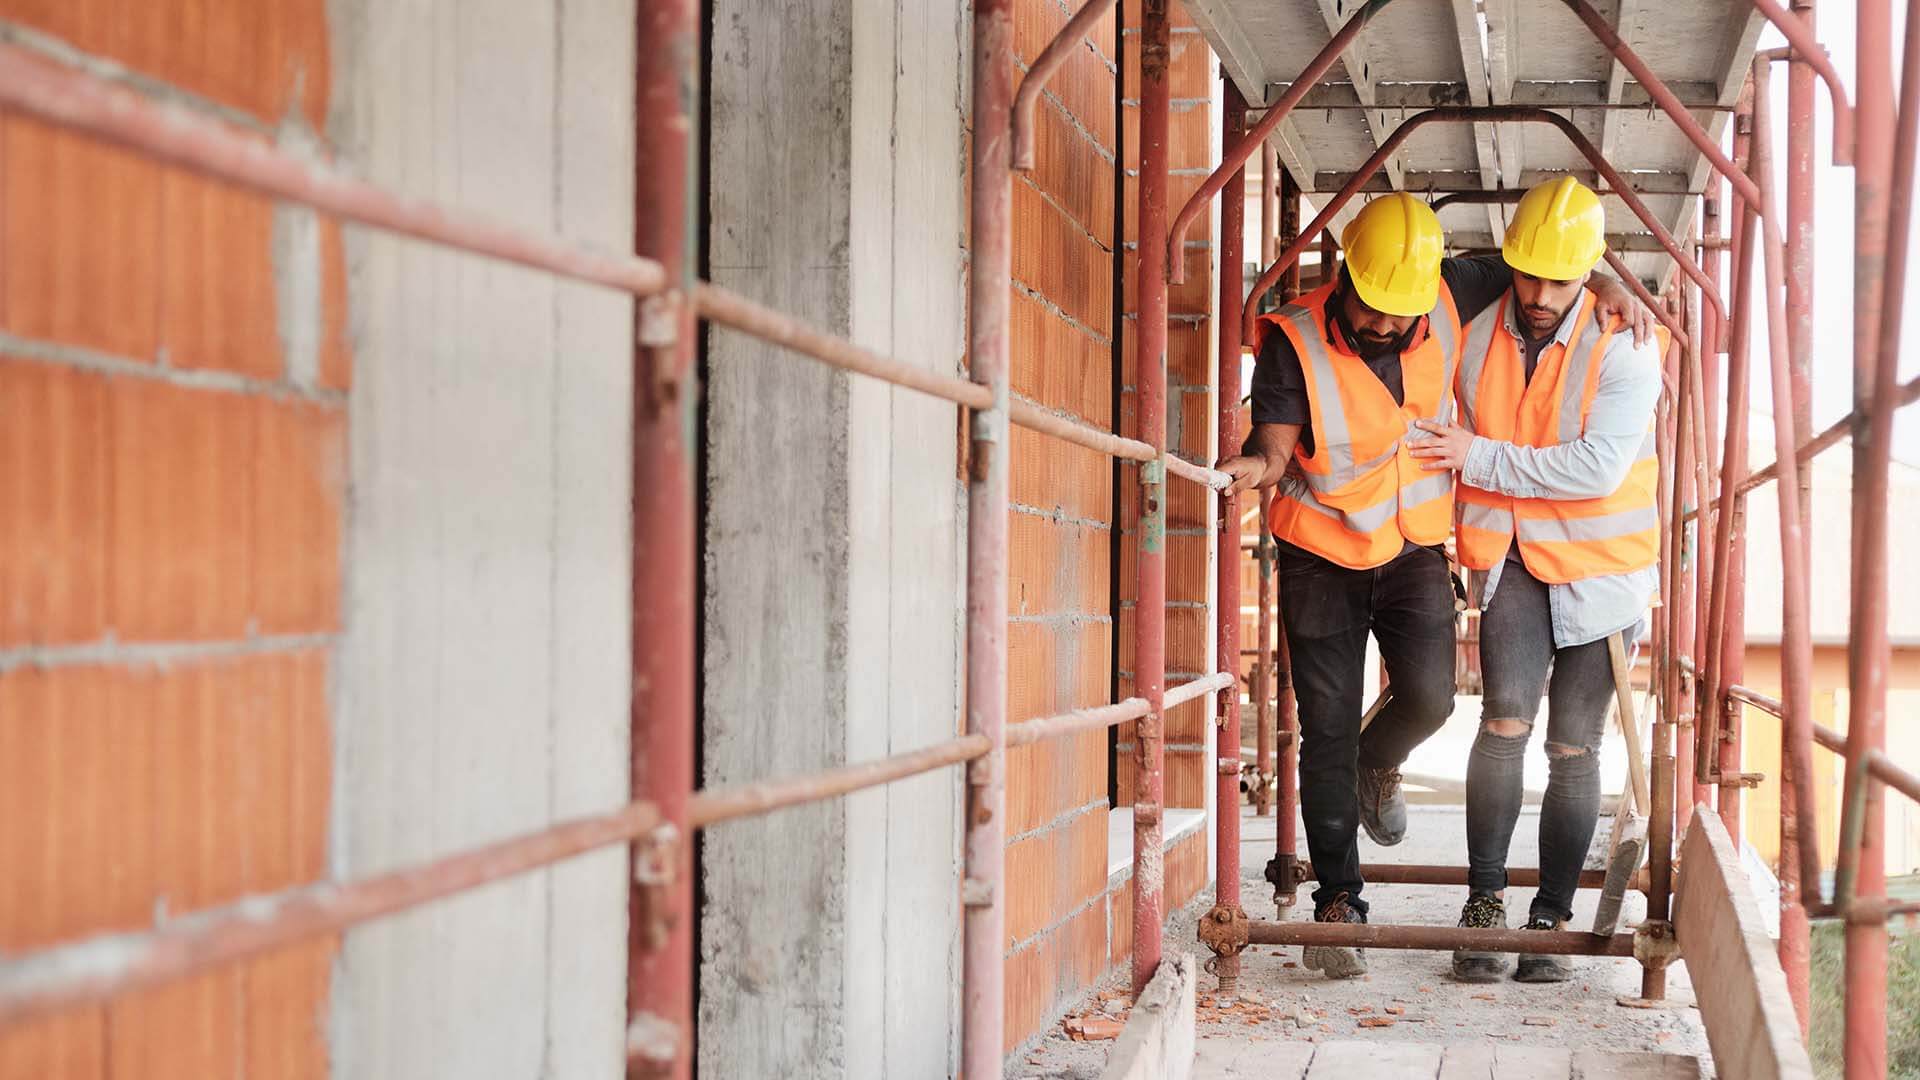 Construction worker injured will now file a workers' compensation claim